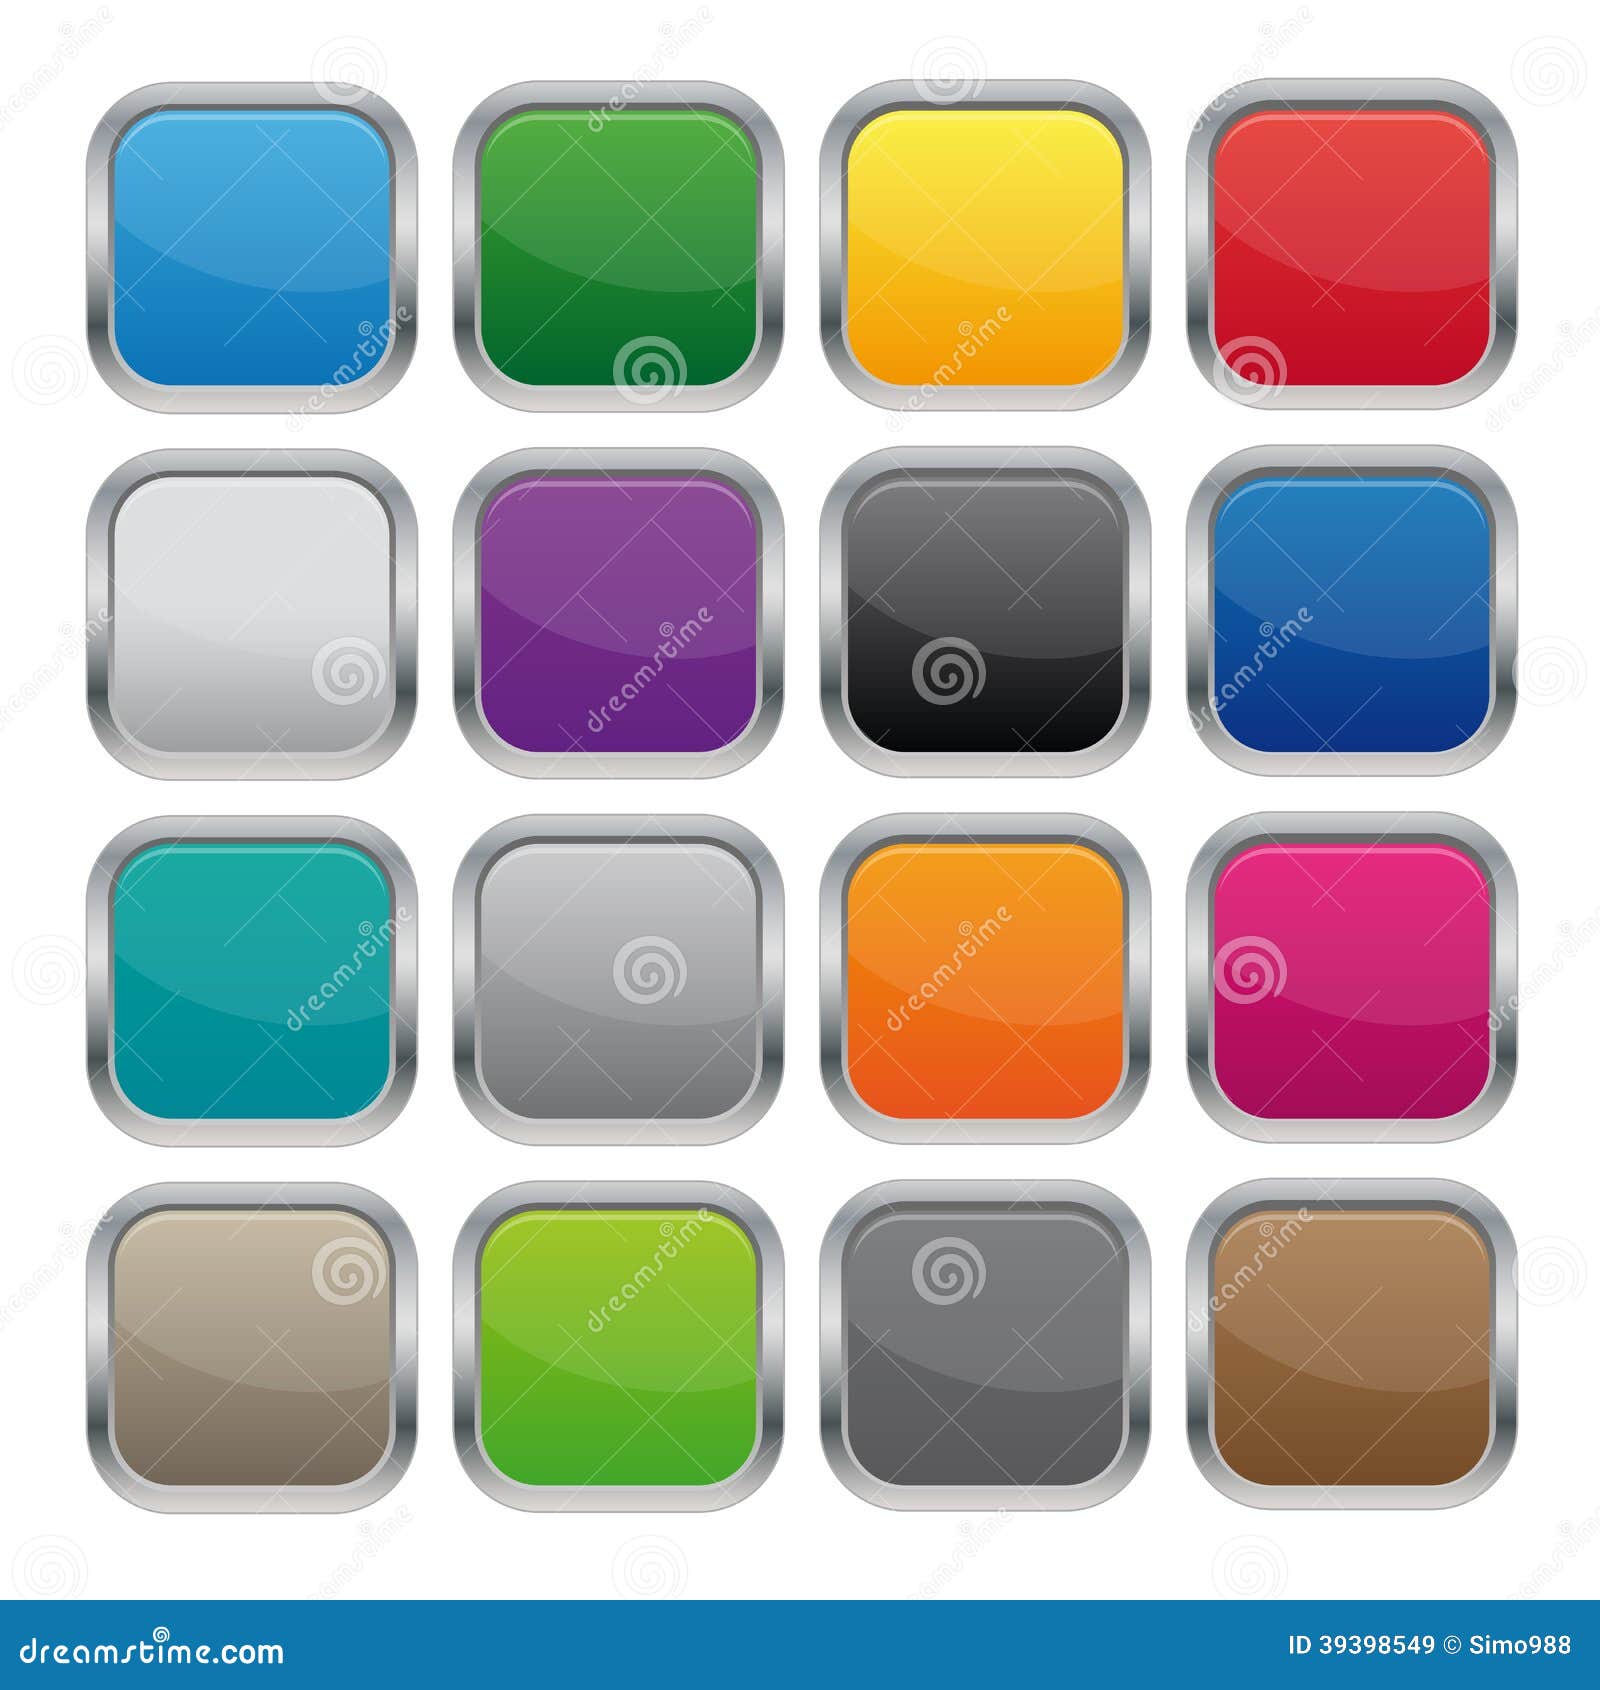 Metallic square buttons stock vector. Illustration of green - 39398549